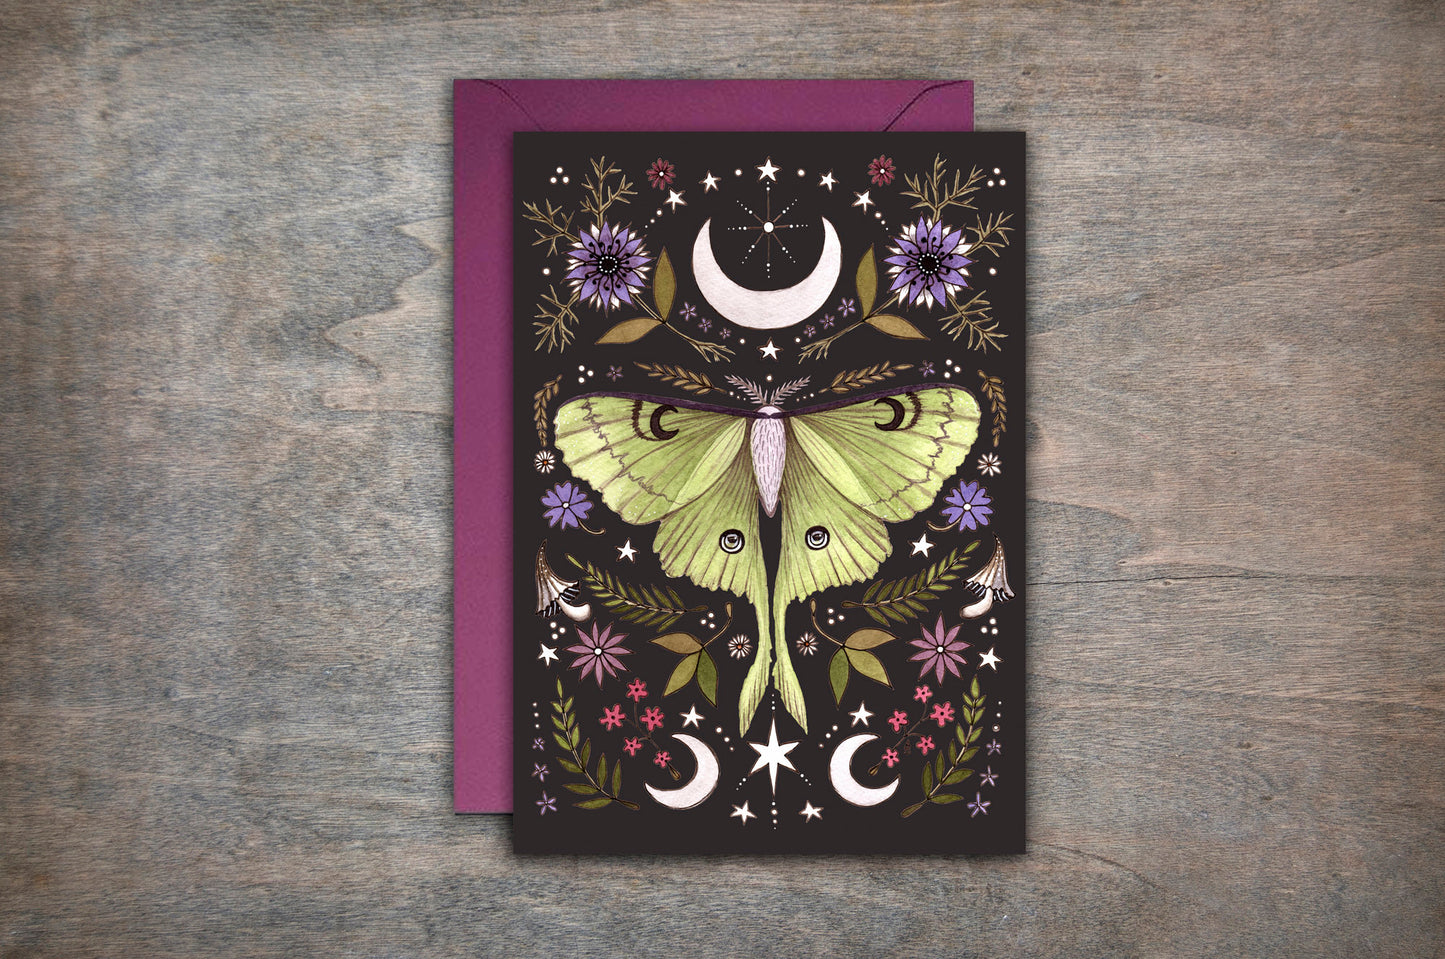 Luna Moth Greetings Card & Envelope - Floral Botanical Moon Moth Celestial Card - Goth Pagan Green Witch Card - Cottagecore Hedgewitch Gift